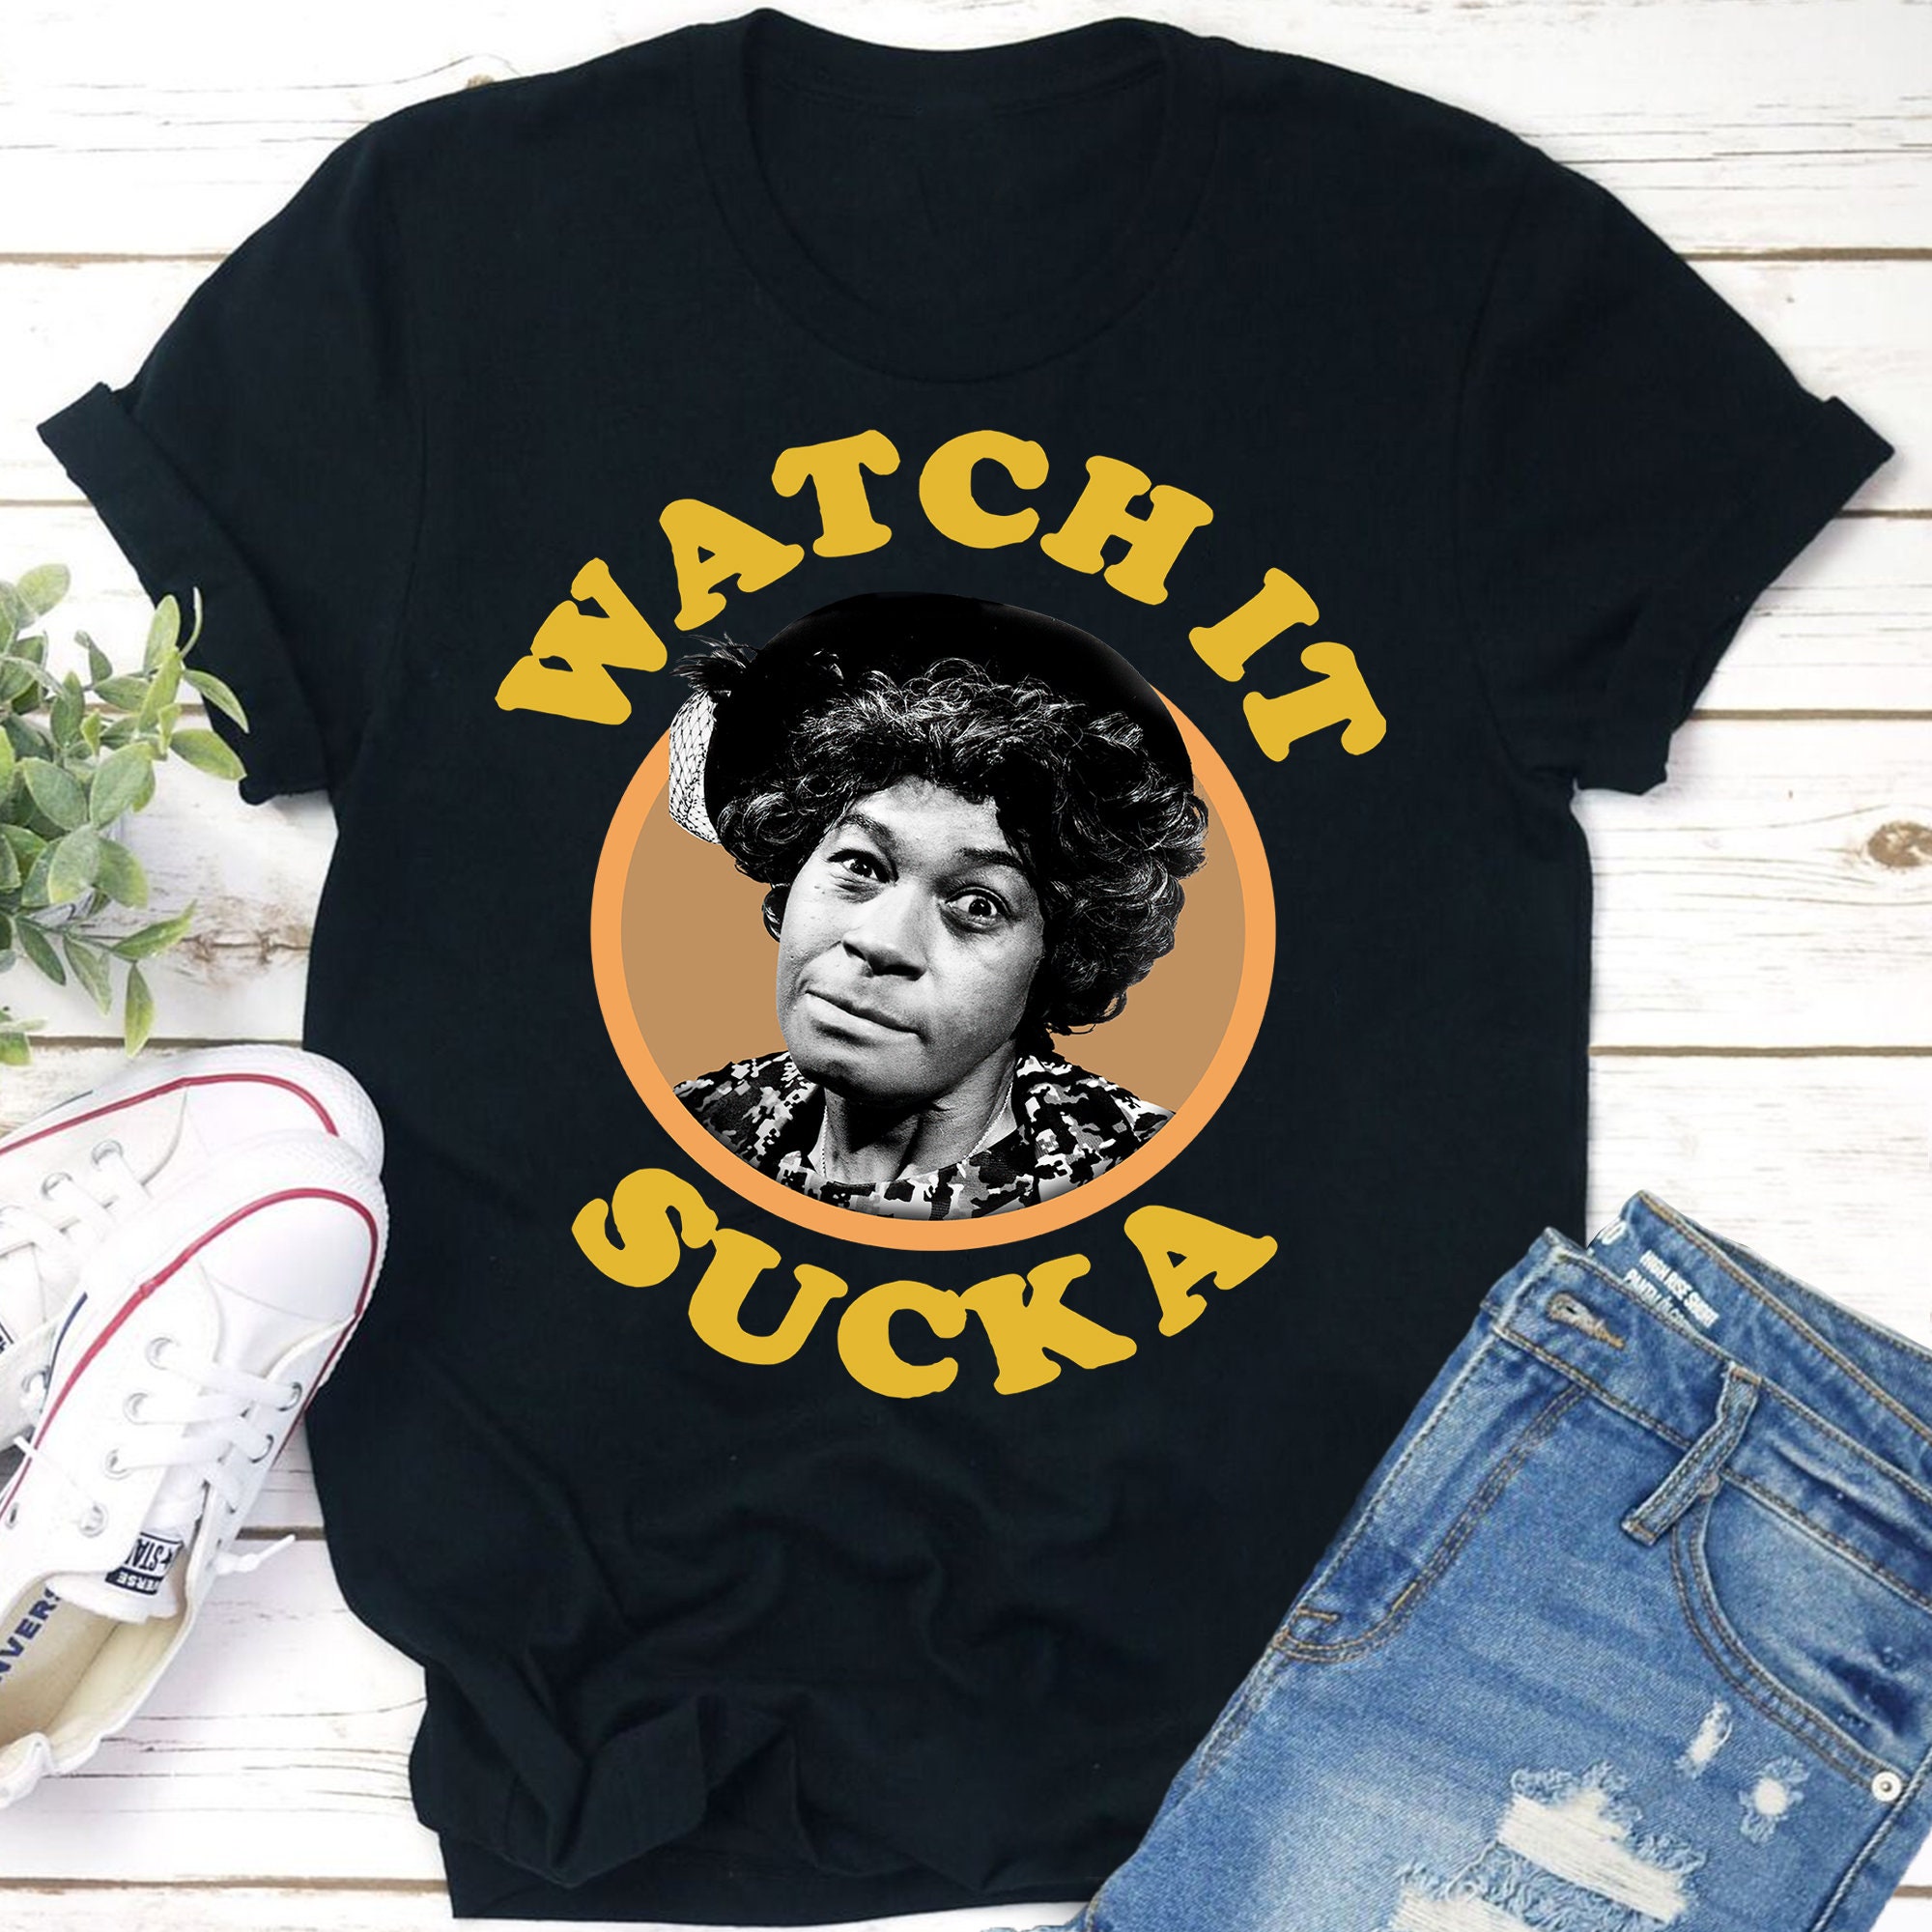 Discover Watch It Sucka Shirts, Sanford And Son Shirt, Movie Posters Gift, Movie Lover, Unisex Custom Shirt, 90s Vintage Movie T Shirt TV5852802